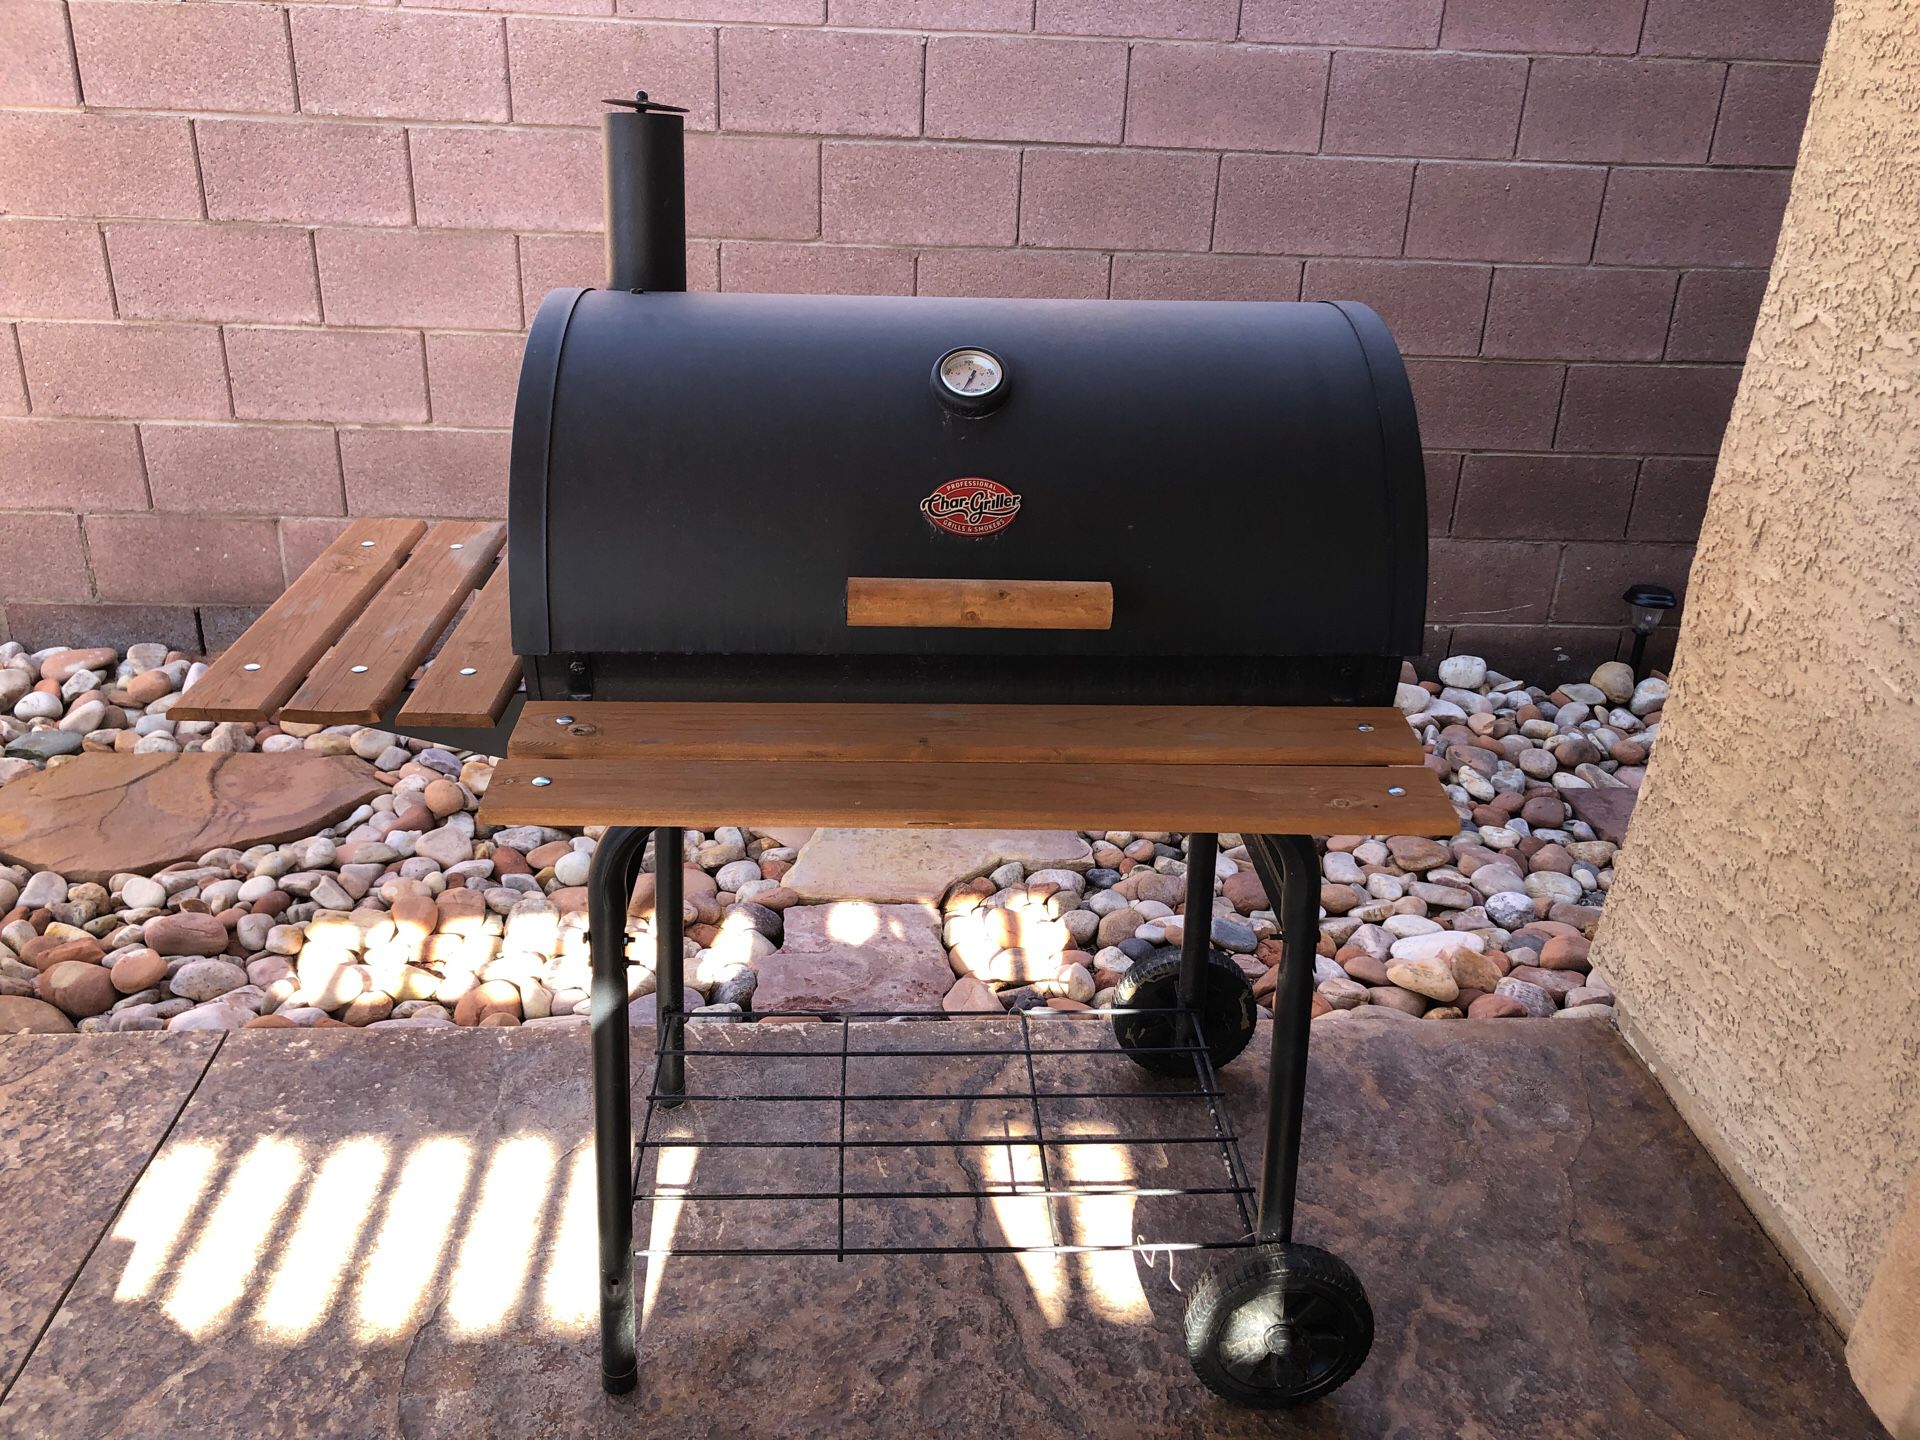 BBQ Grill “Charcoal “ in great condition used just a few times NO DELIVERY